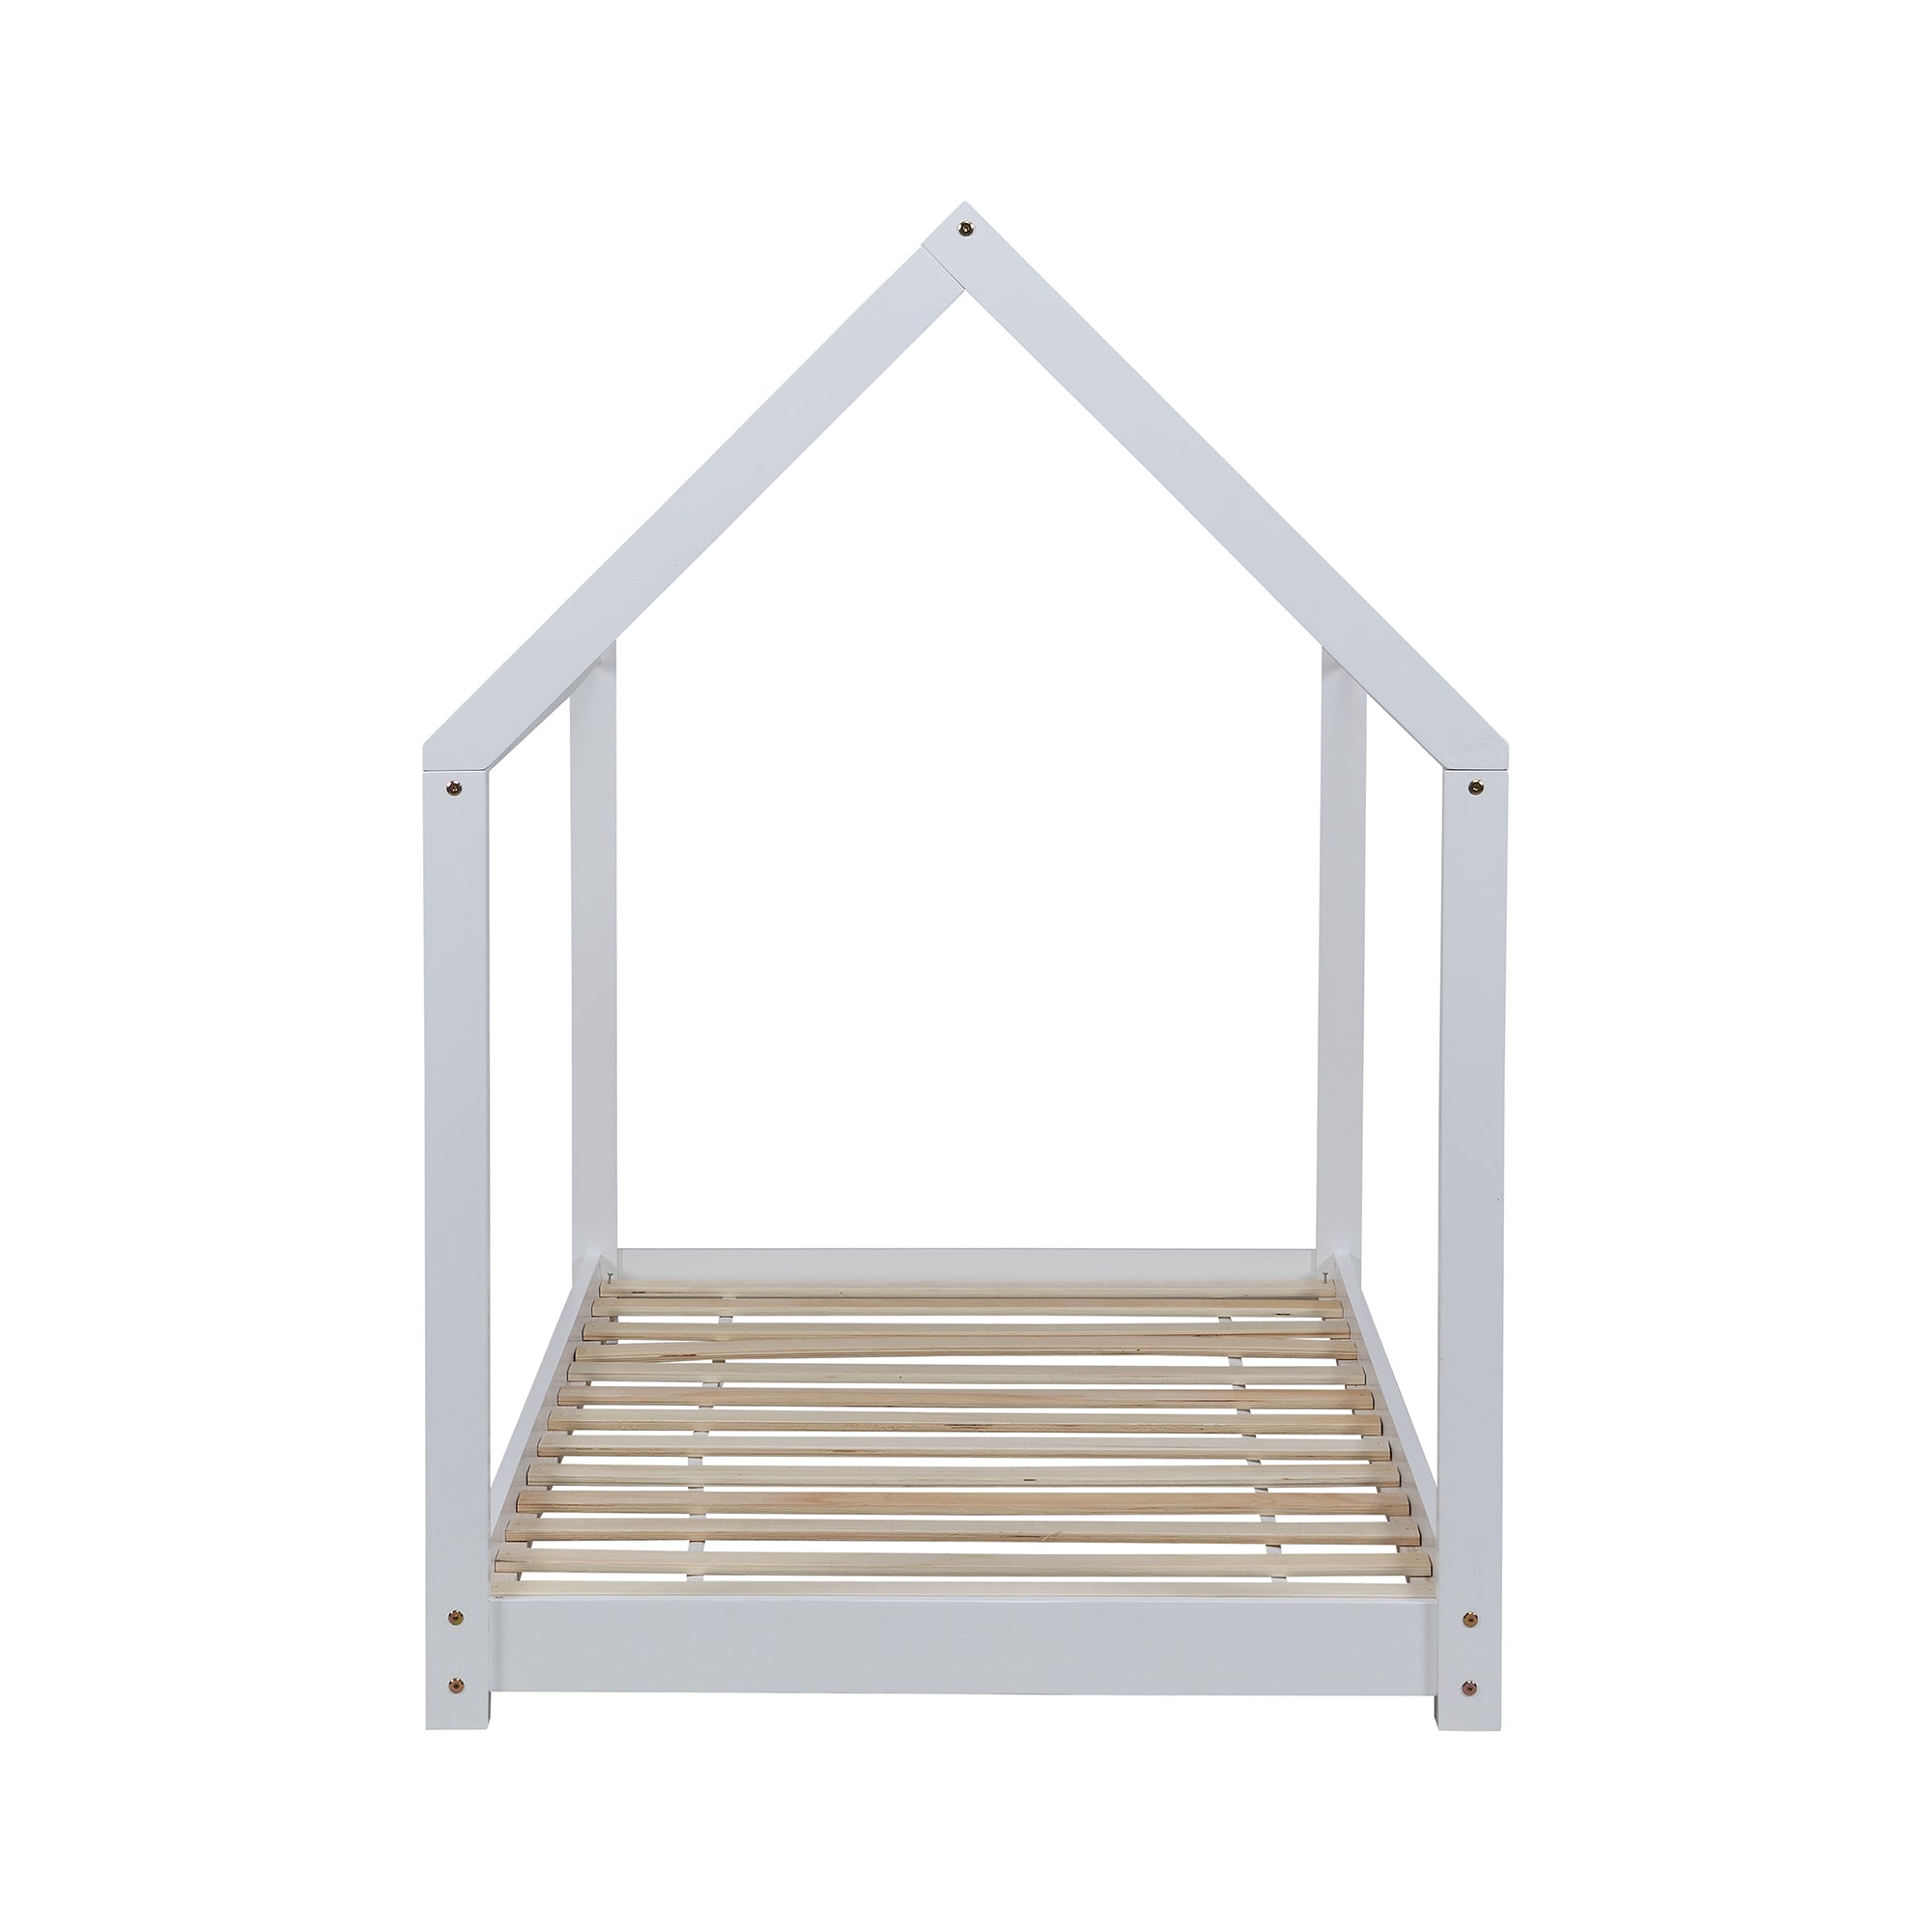 Bethwin Solid Wood Kid's House Bed in White